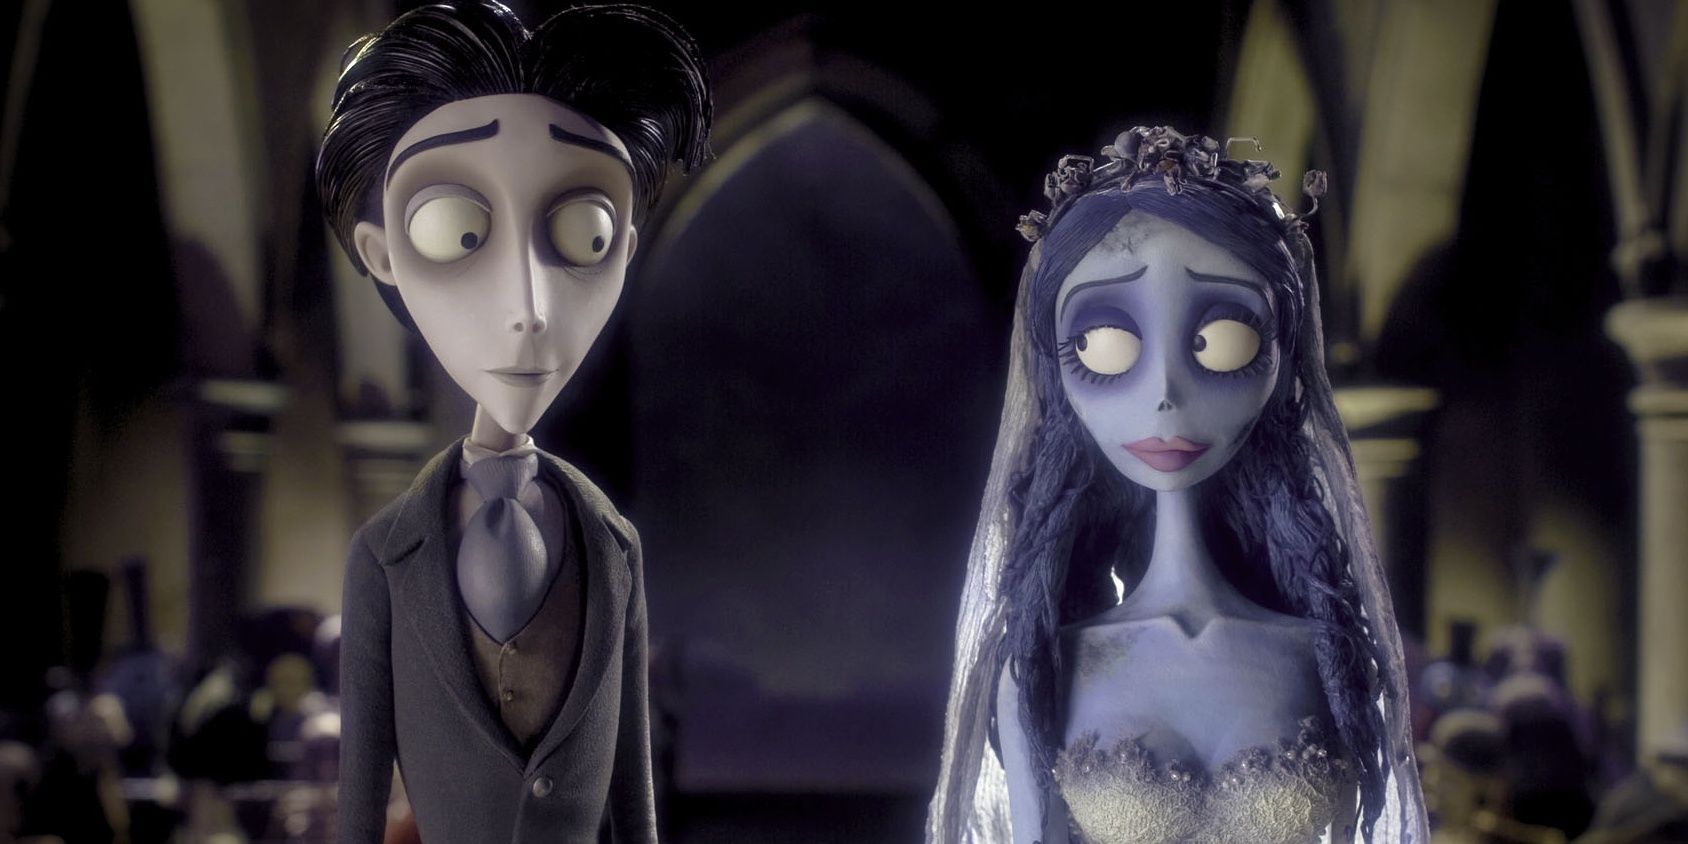 The two main characters in Corpse Bride